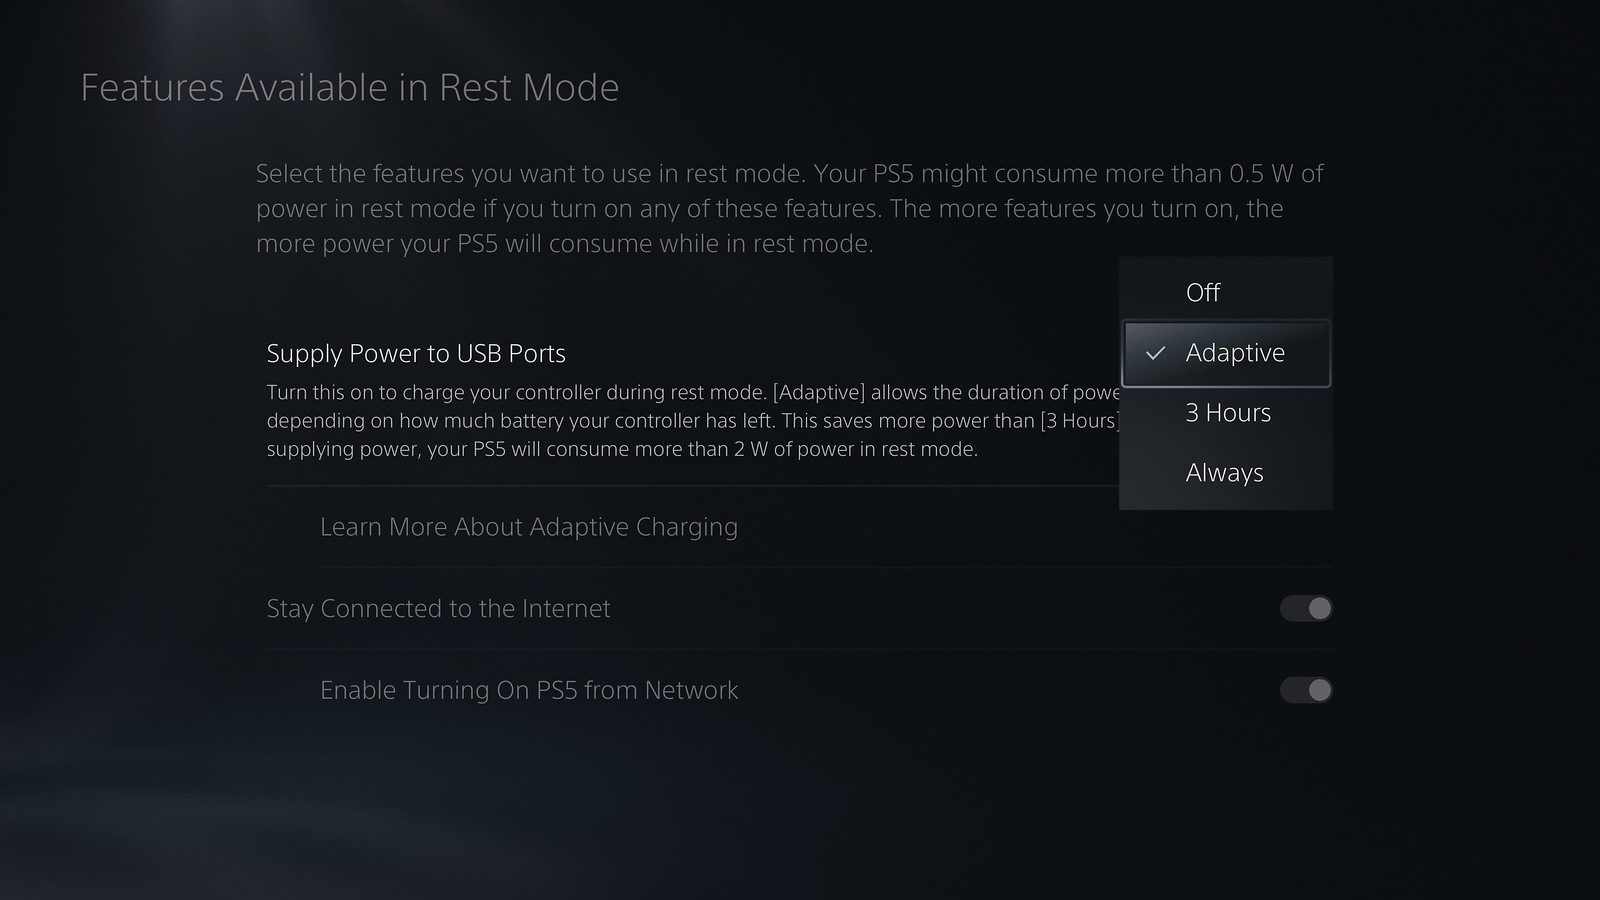 The menu shows "Features Available in Rest Mode," where users can configure the power supply to USB ports with options like "Off," "Adaptive," and "3 Hours." The screen highlights how each setting affects power consumption, with an option to learn more about Adaptive Charging. This is part of PS5's beta program.